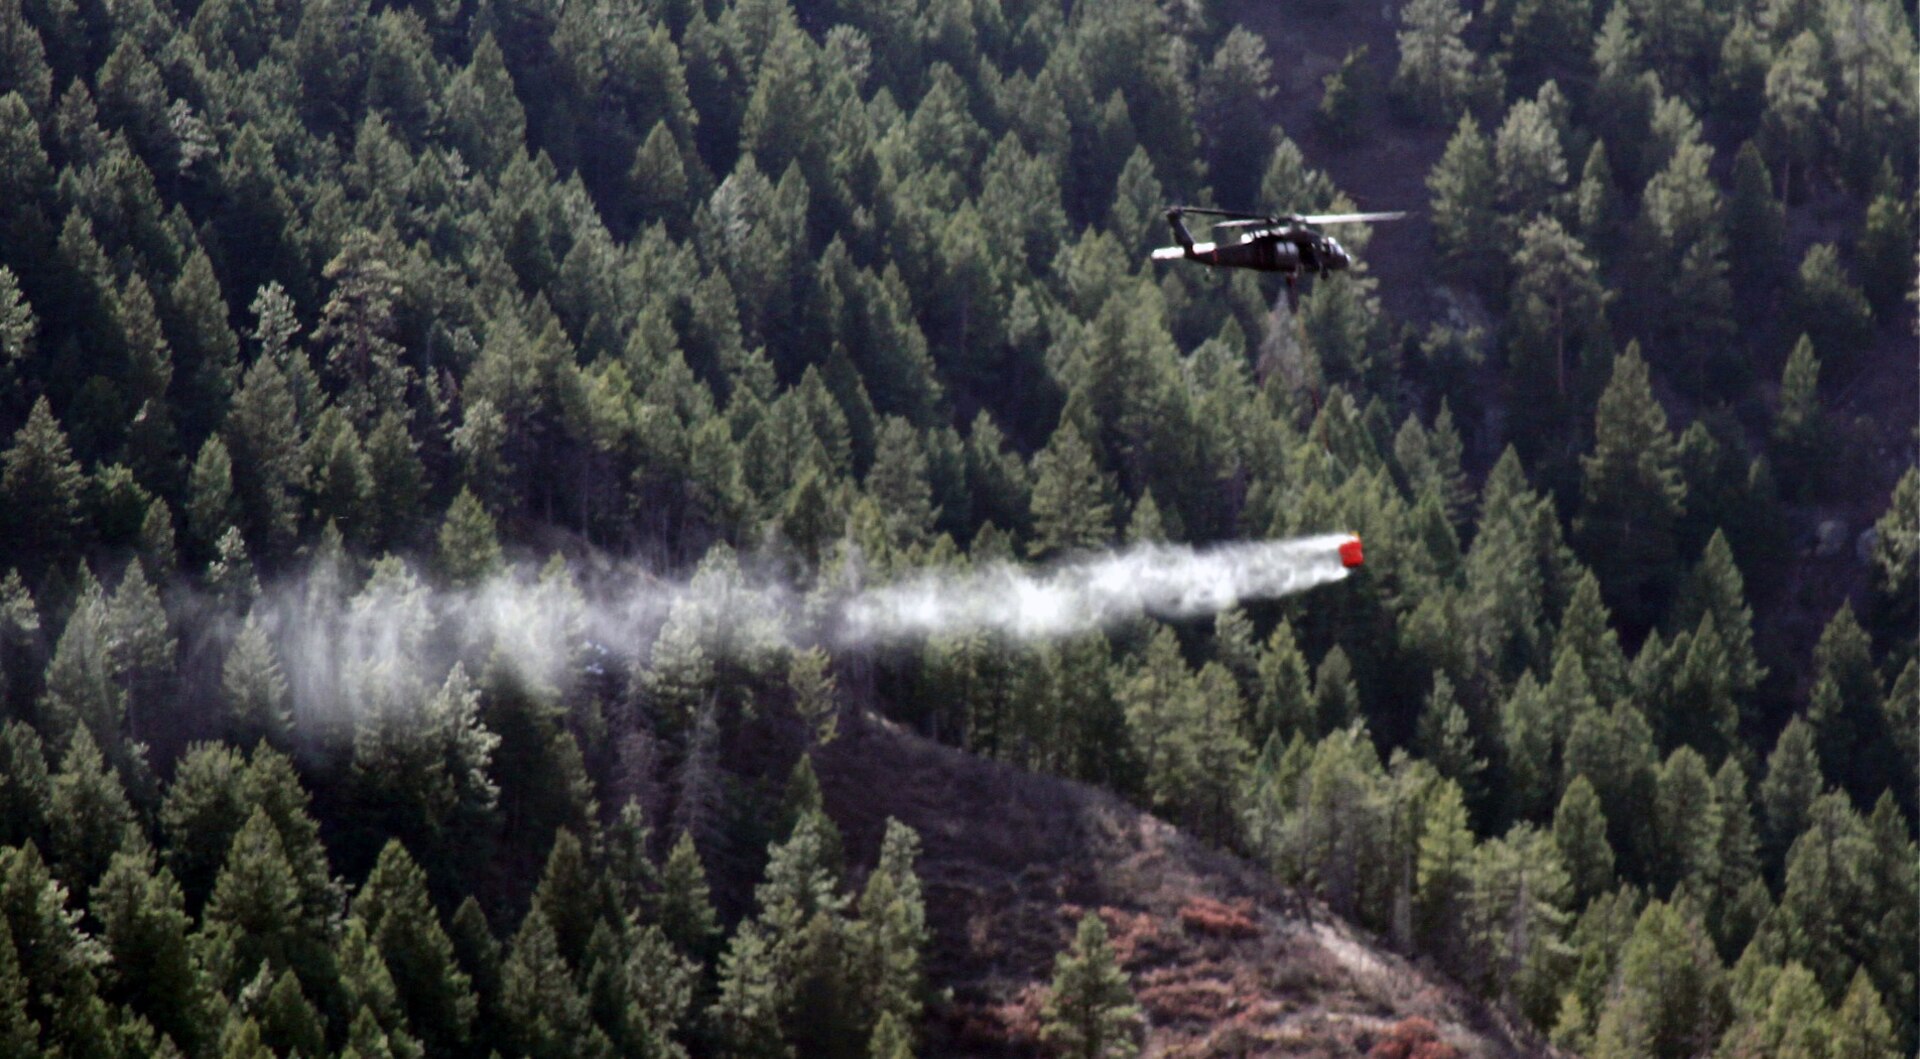 A UH-60 Black Hawk helicopter from the Colorado Army National Guard's 2nd Battalion, 135th General Support Aviation, drops 500 gallons of water from a specialized bucket onto the Lower North Fork Fire in the vicinity of Conifer Colo., March 28, 2012.